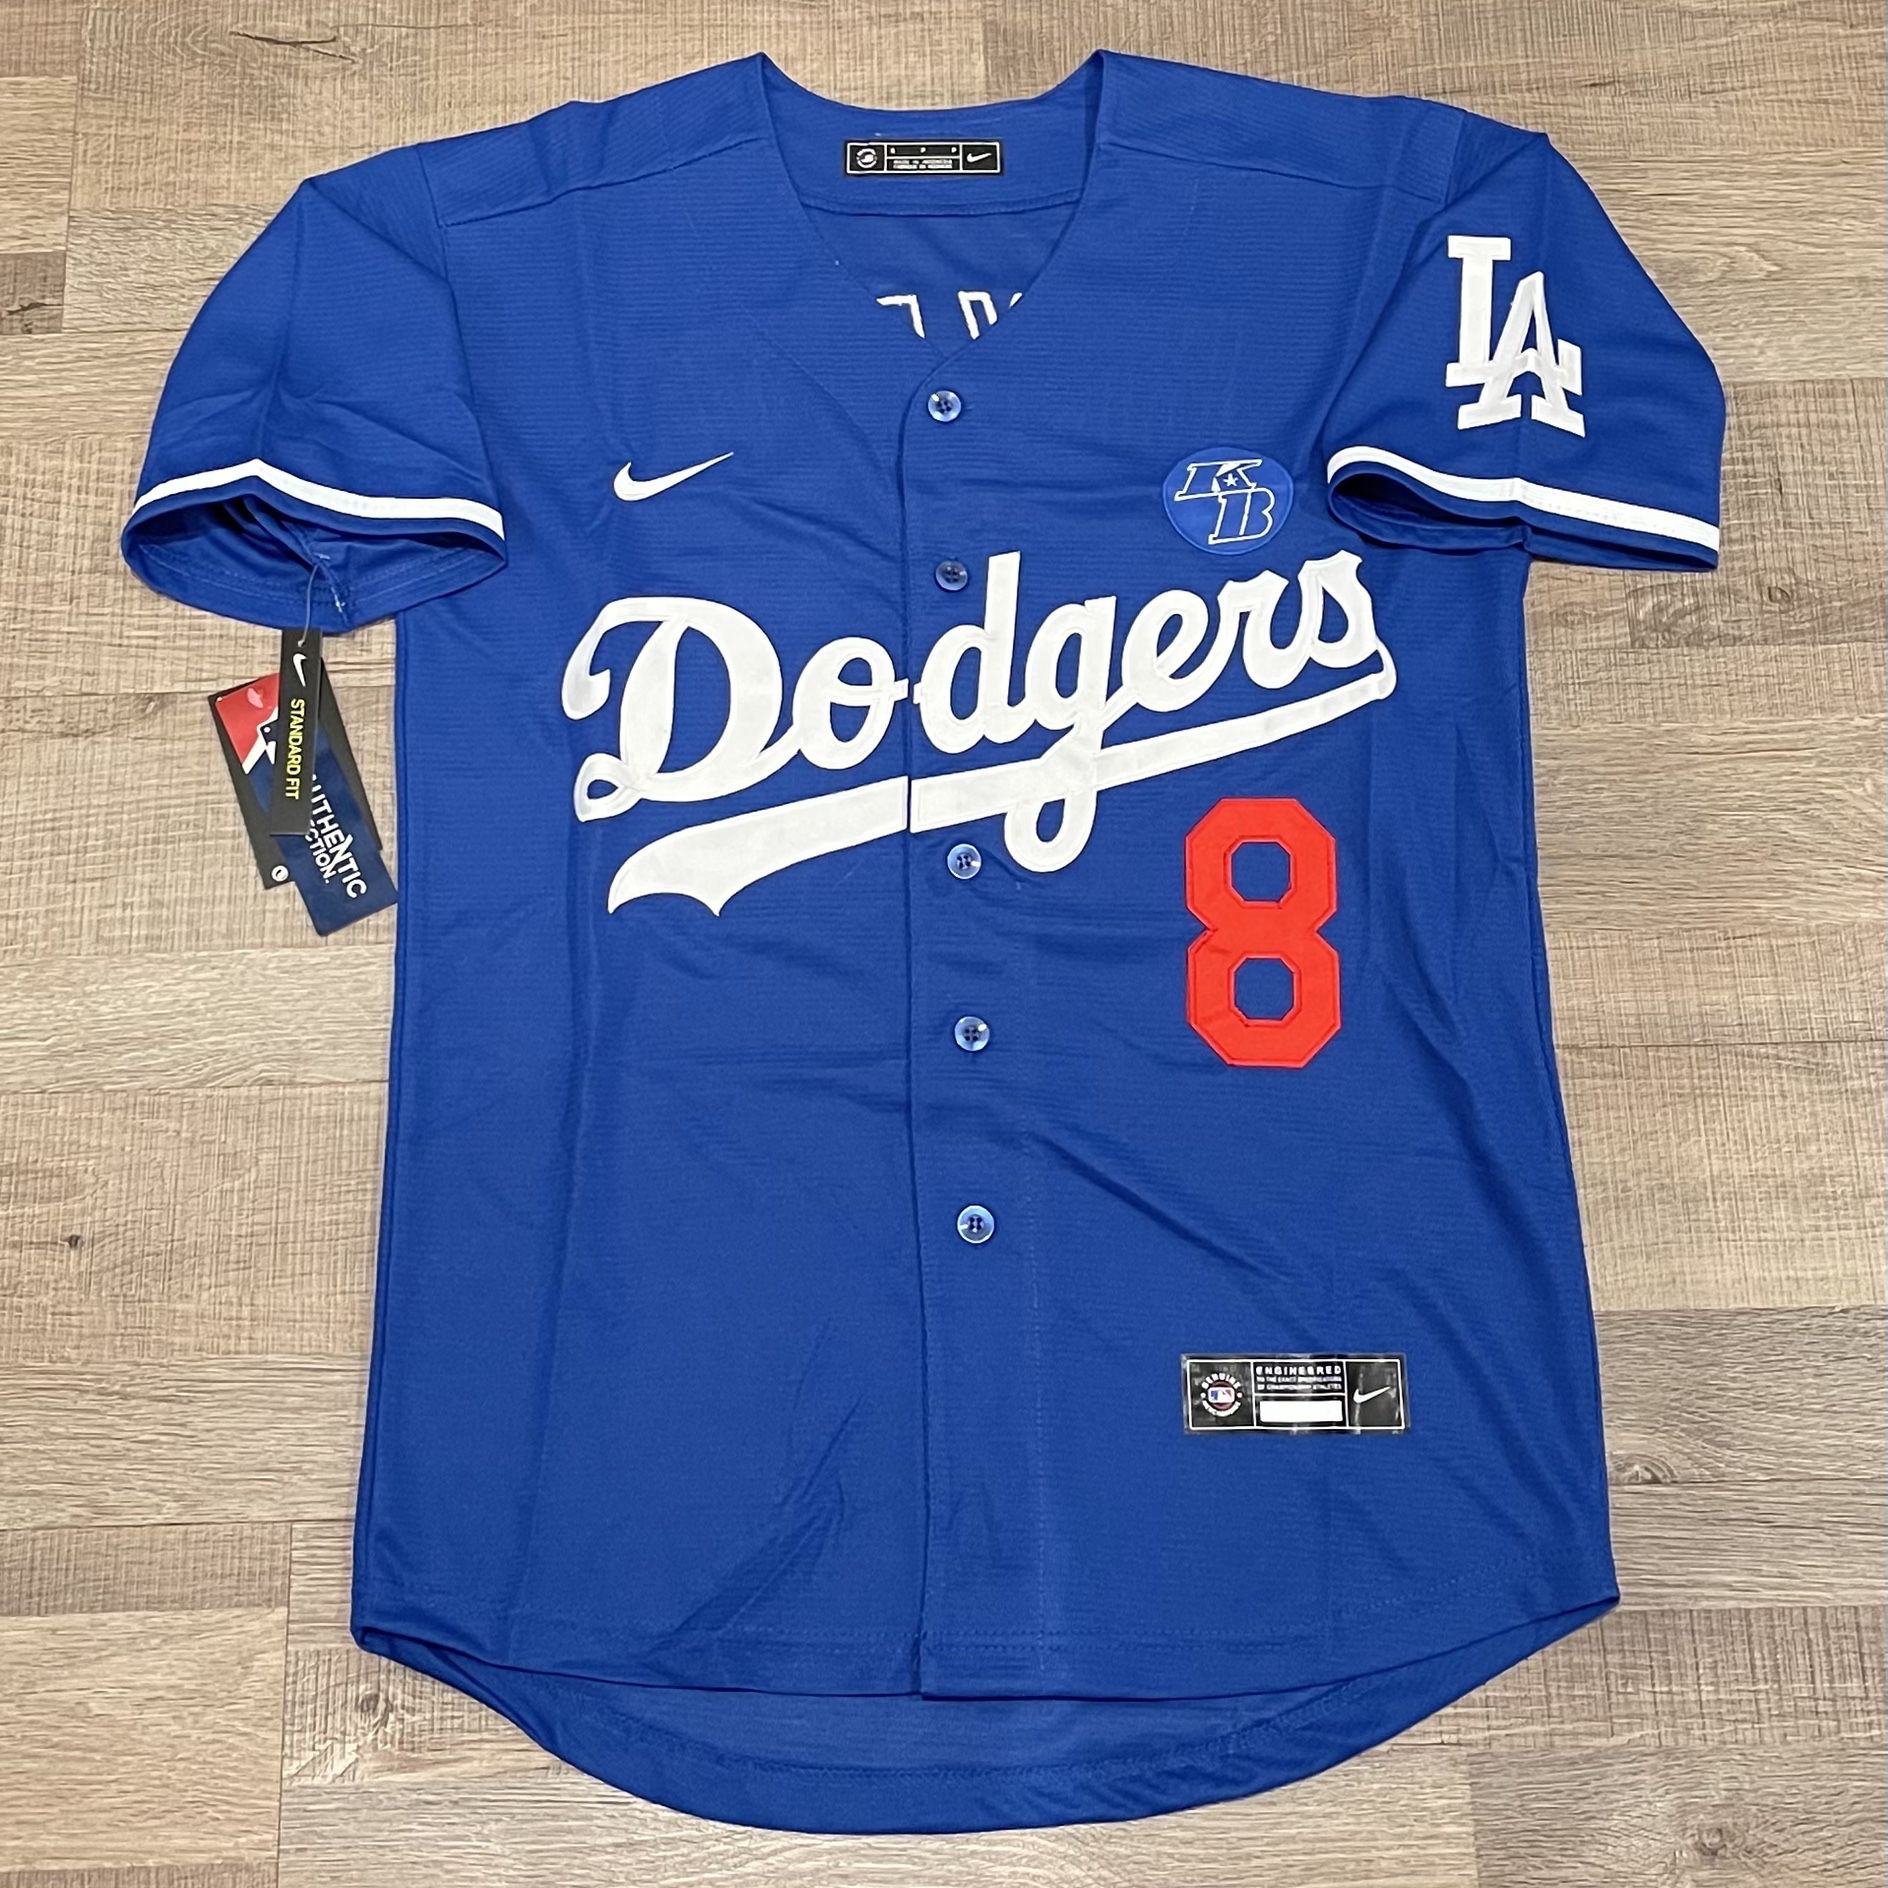 Kobe Dodgers Tribute Jersey Size: Small for Sale in Ontario, CA - OfferUp